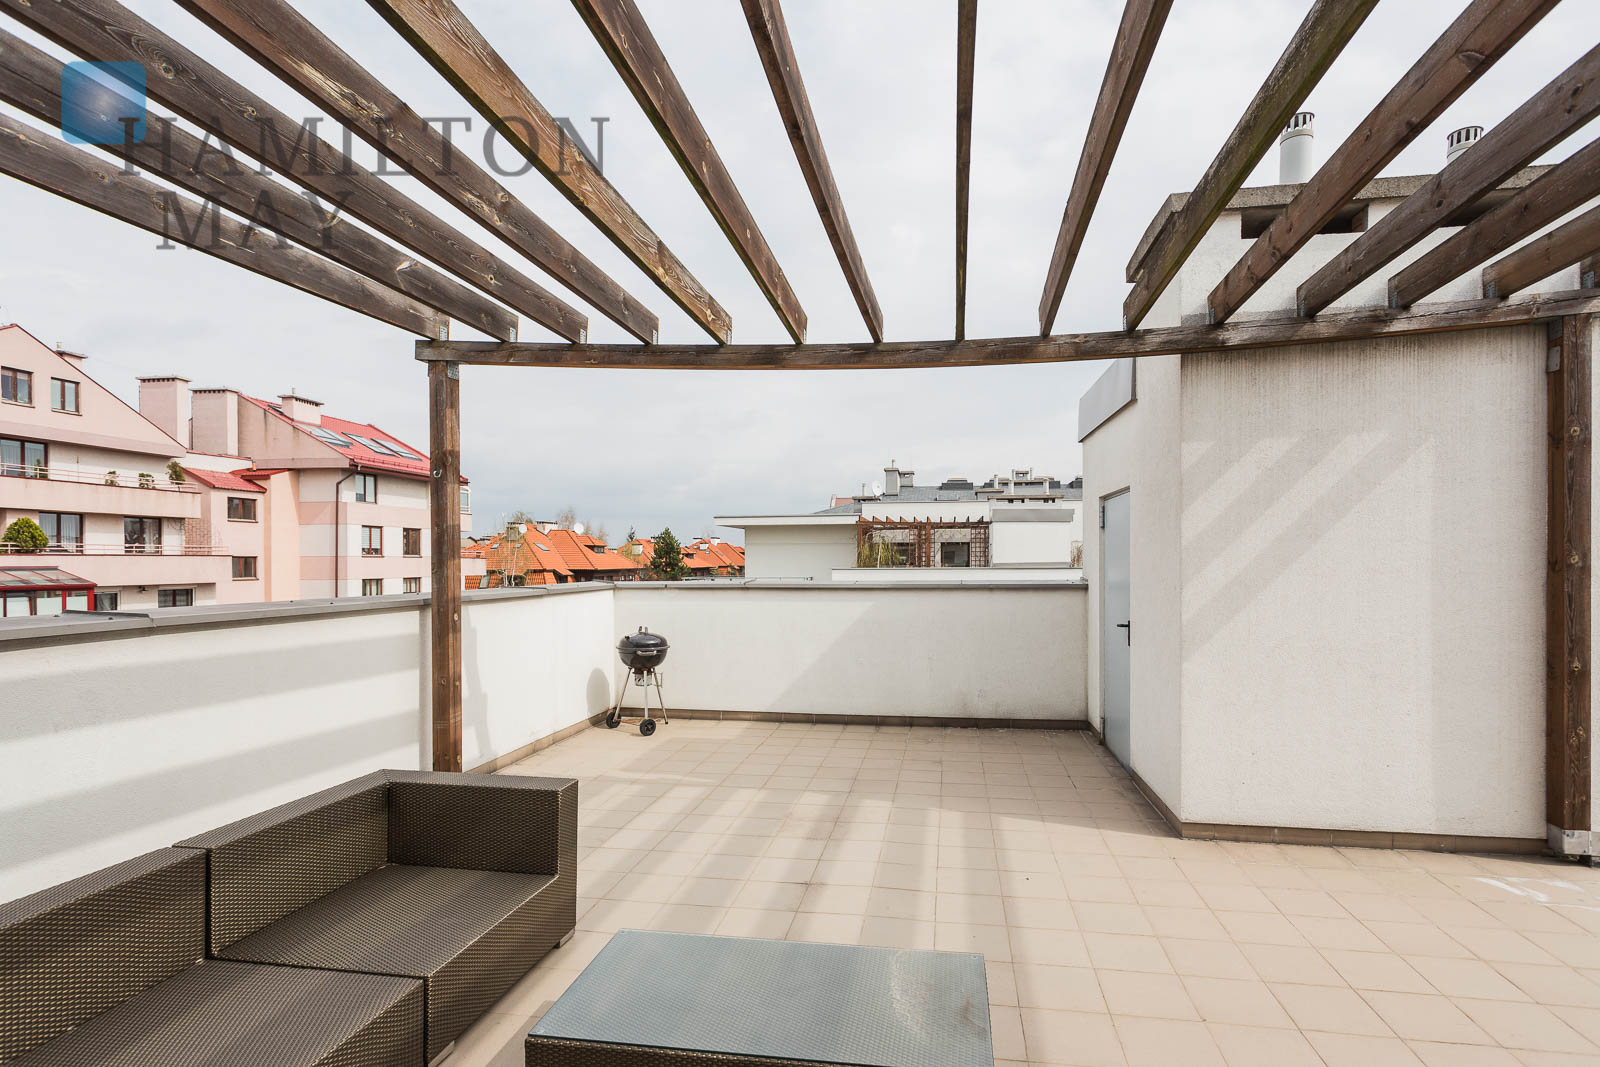 New and spacious apartment of 82 m2 with a terrace and balcony in a discreet Mistral settlement Warsaw for rent